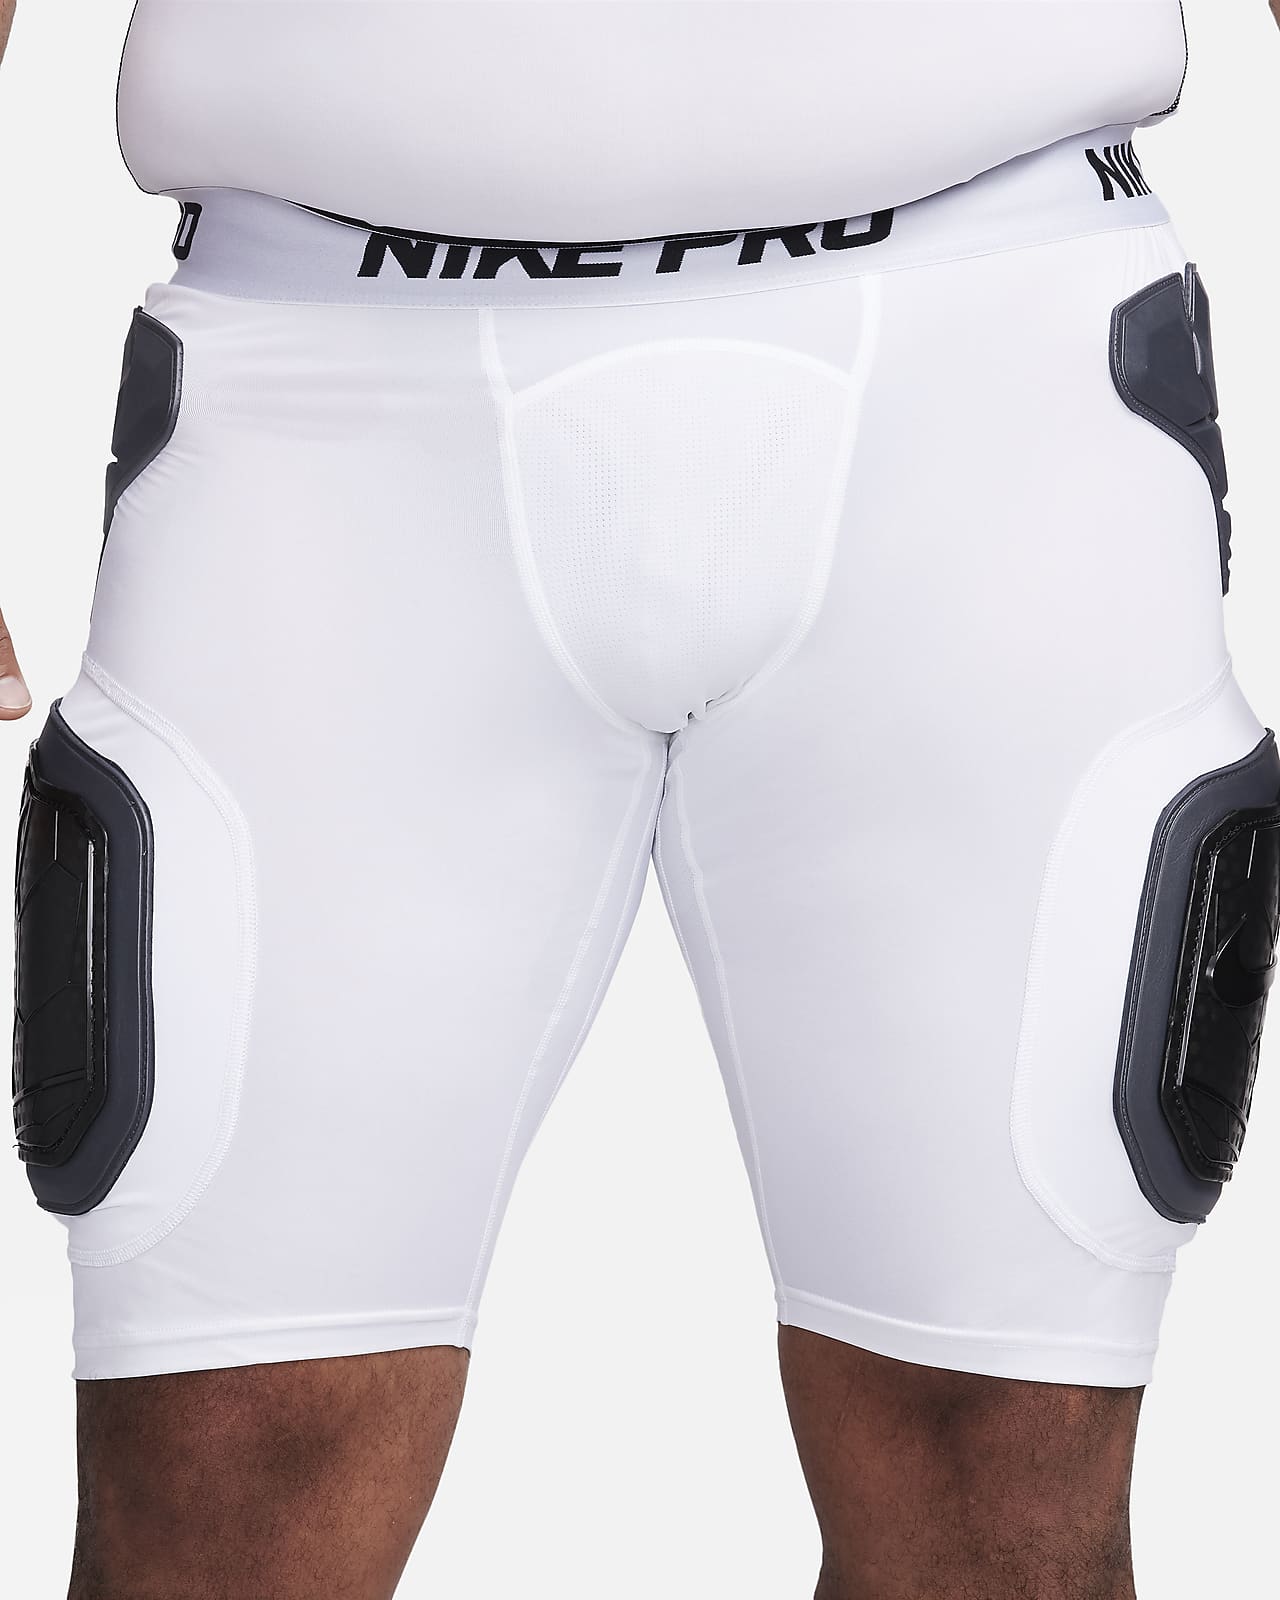 Nike NBA Pro Hyperstrong Padded Compression Shorts Qatar